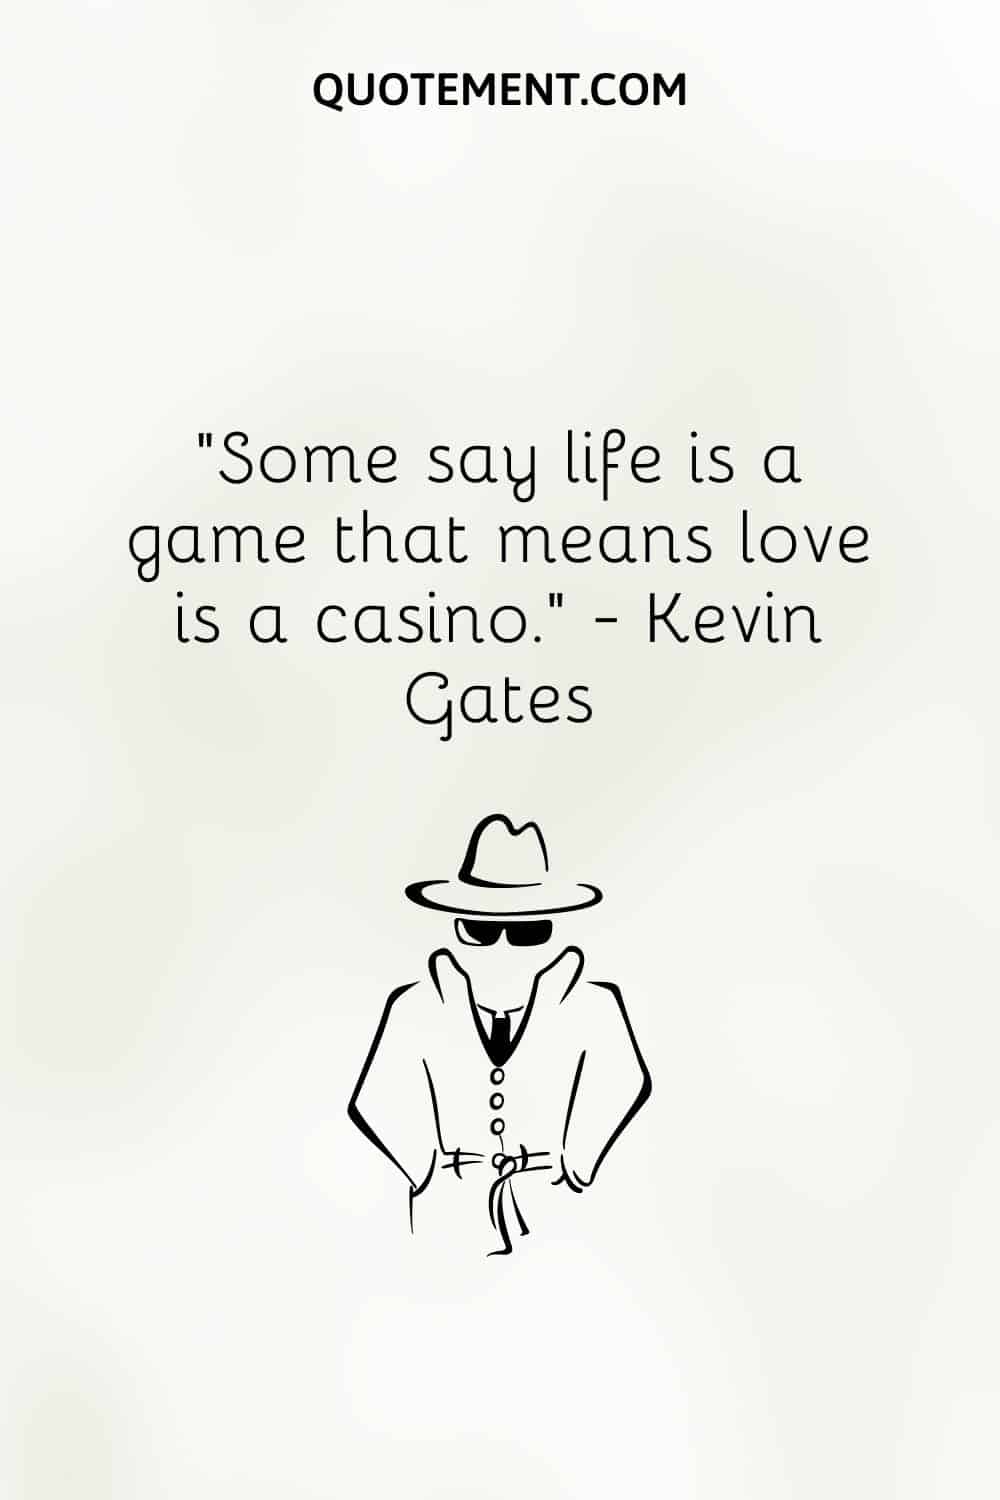 Some say life is a game that means love is a casino